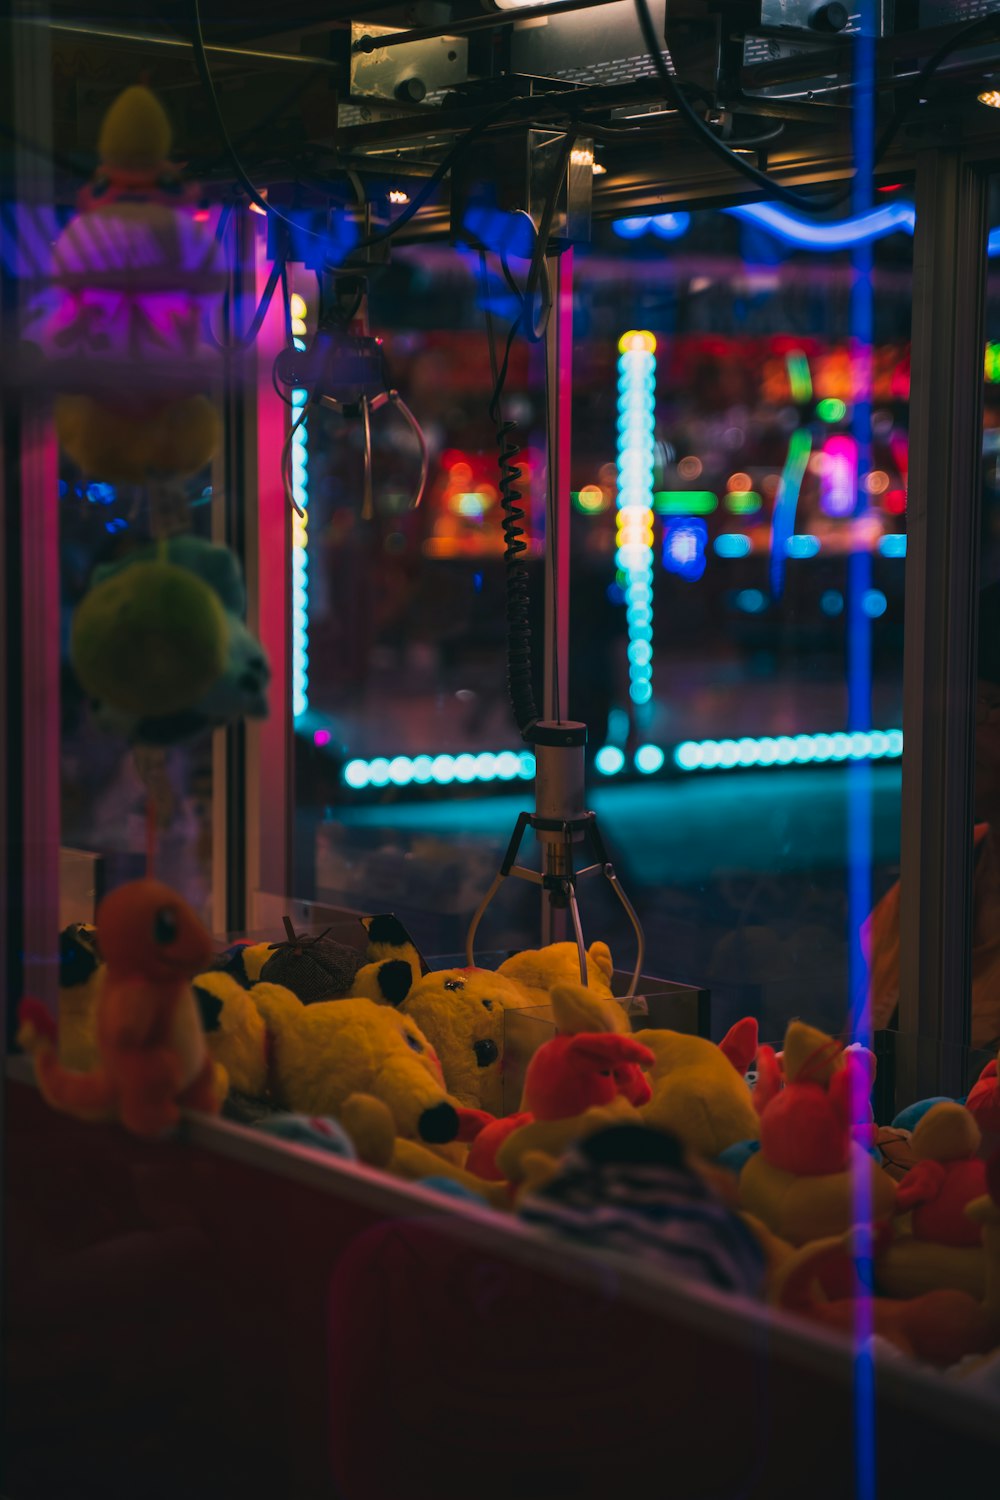 a group of stuffed animals in a room with colorful lights